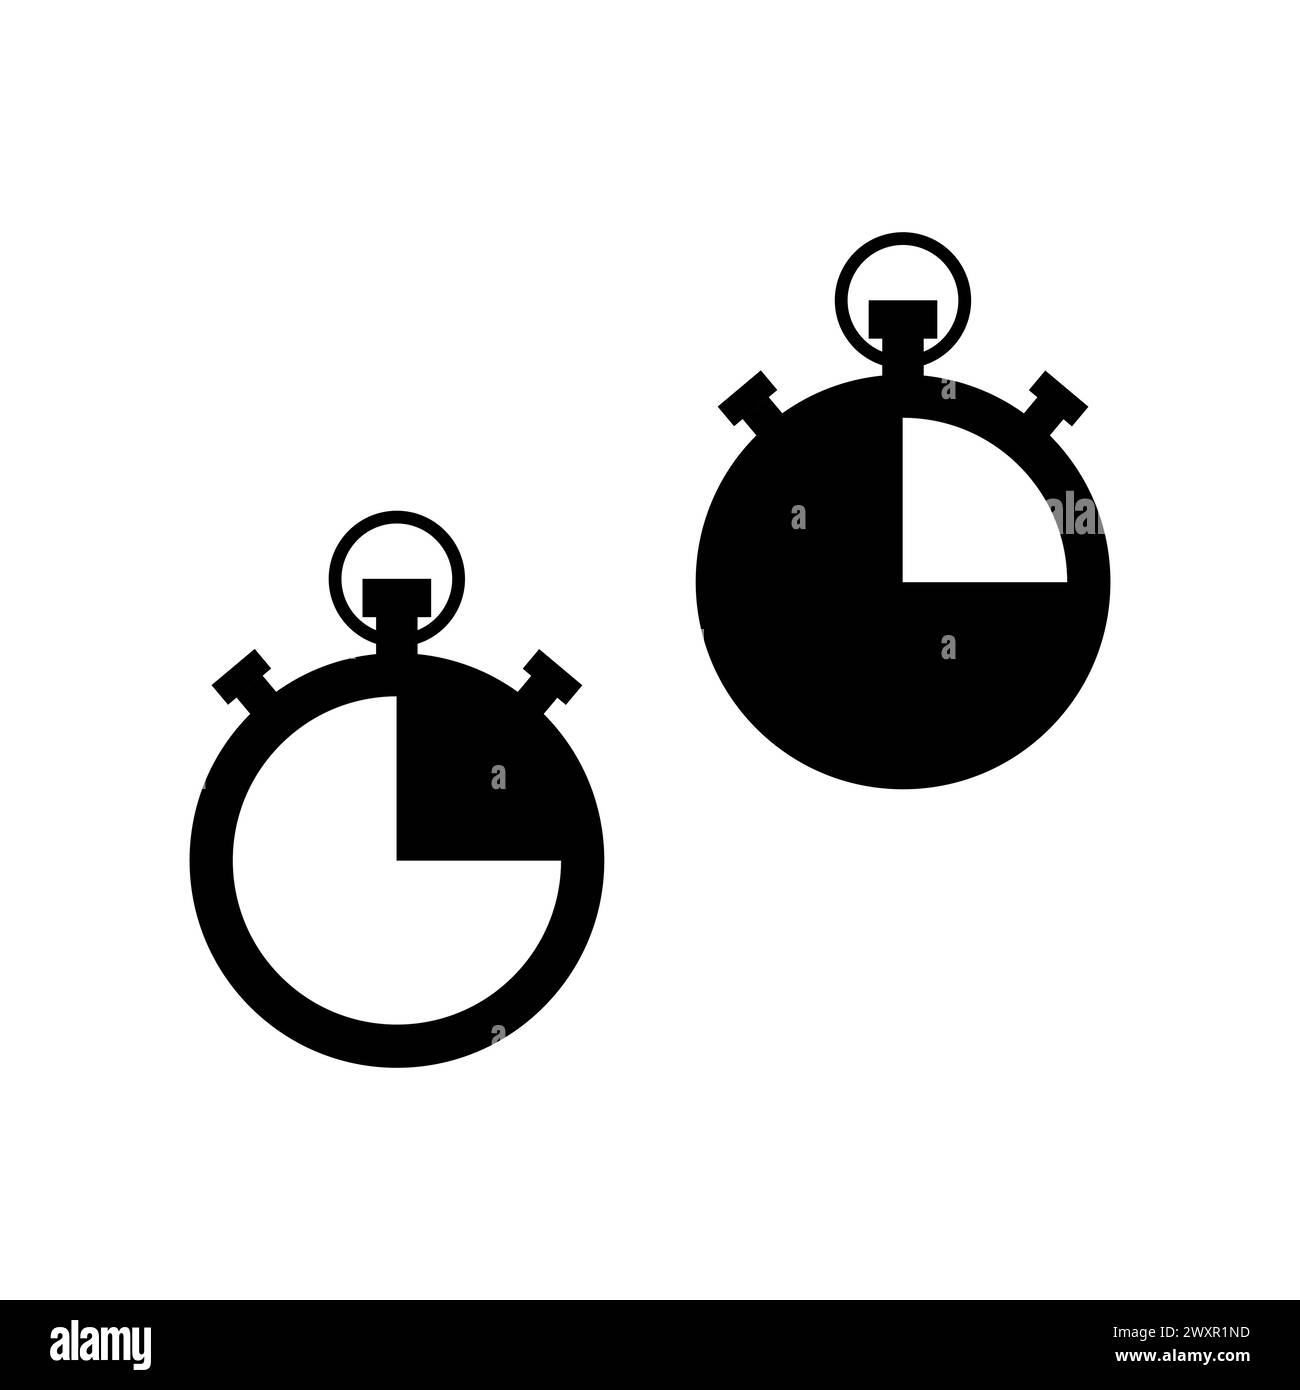 Stopwatch icons set. Time measurement symbols. Simple black and white chronometers. Vector illustration. EPS 10. Stock Vector